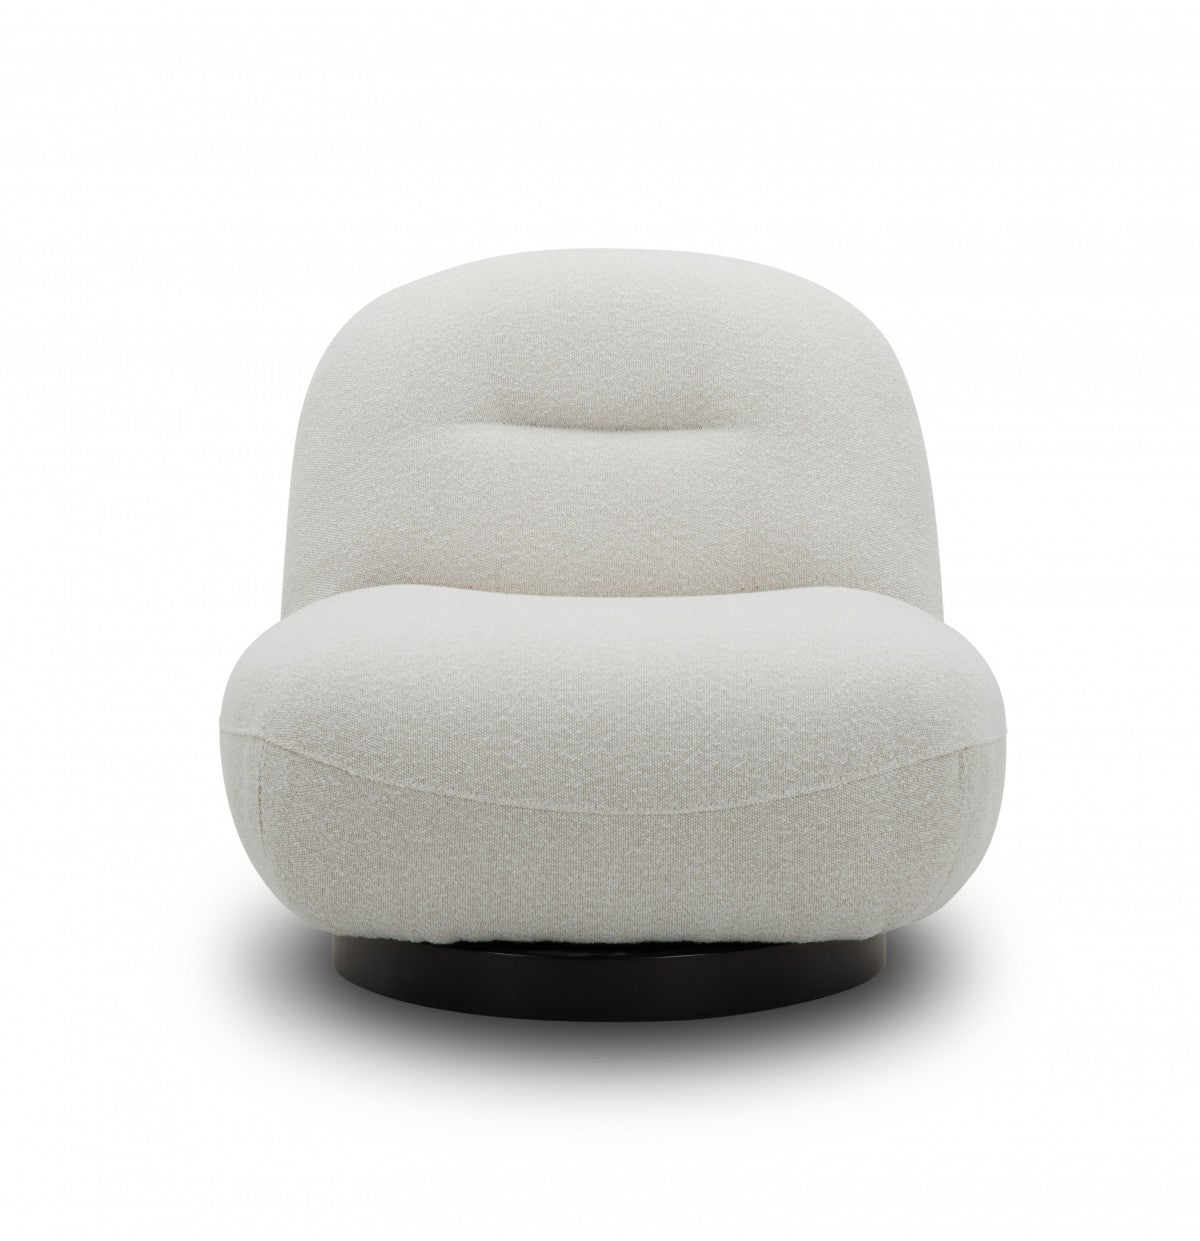 Darby Swivel Lounge Chair